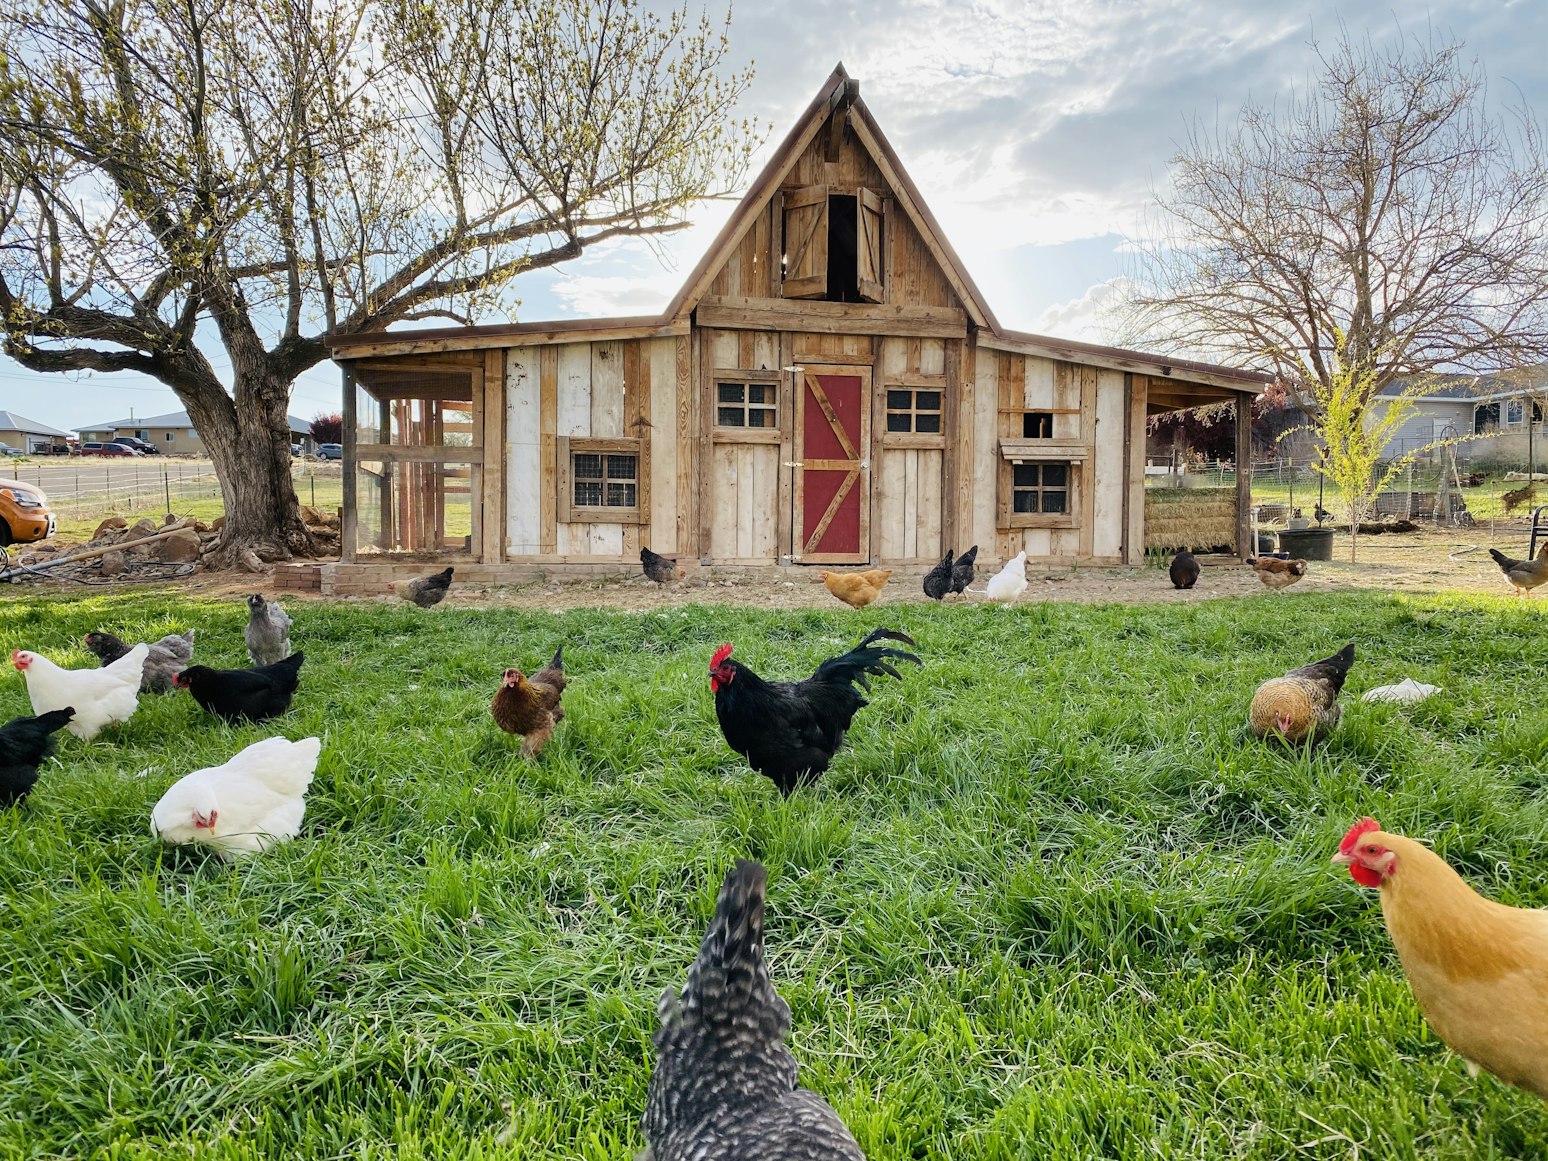 Chickens gathering in green grass in front of a small wooden barn.